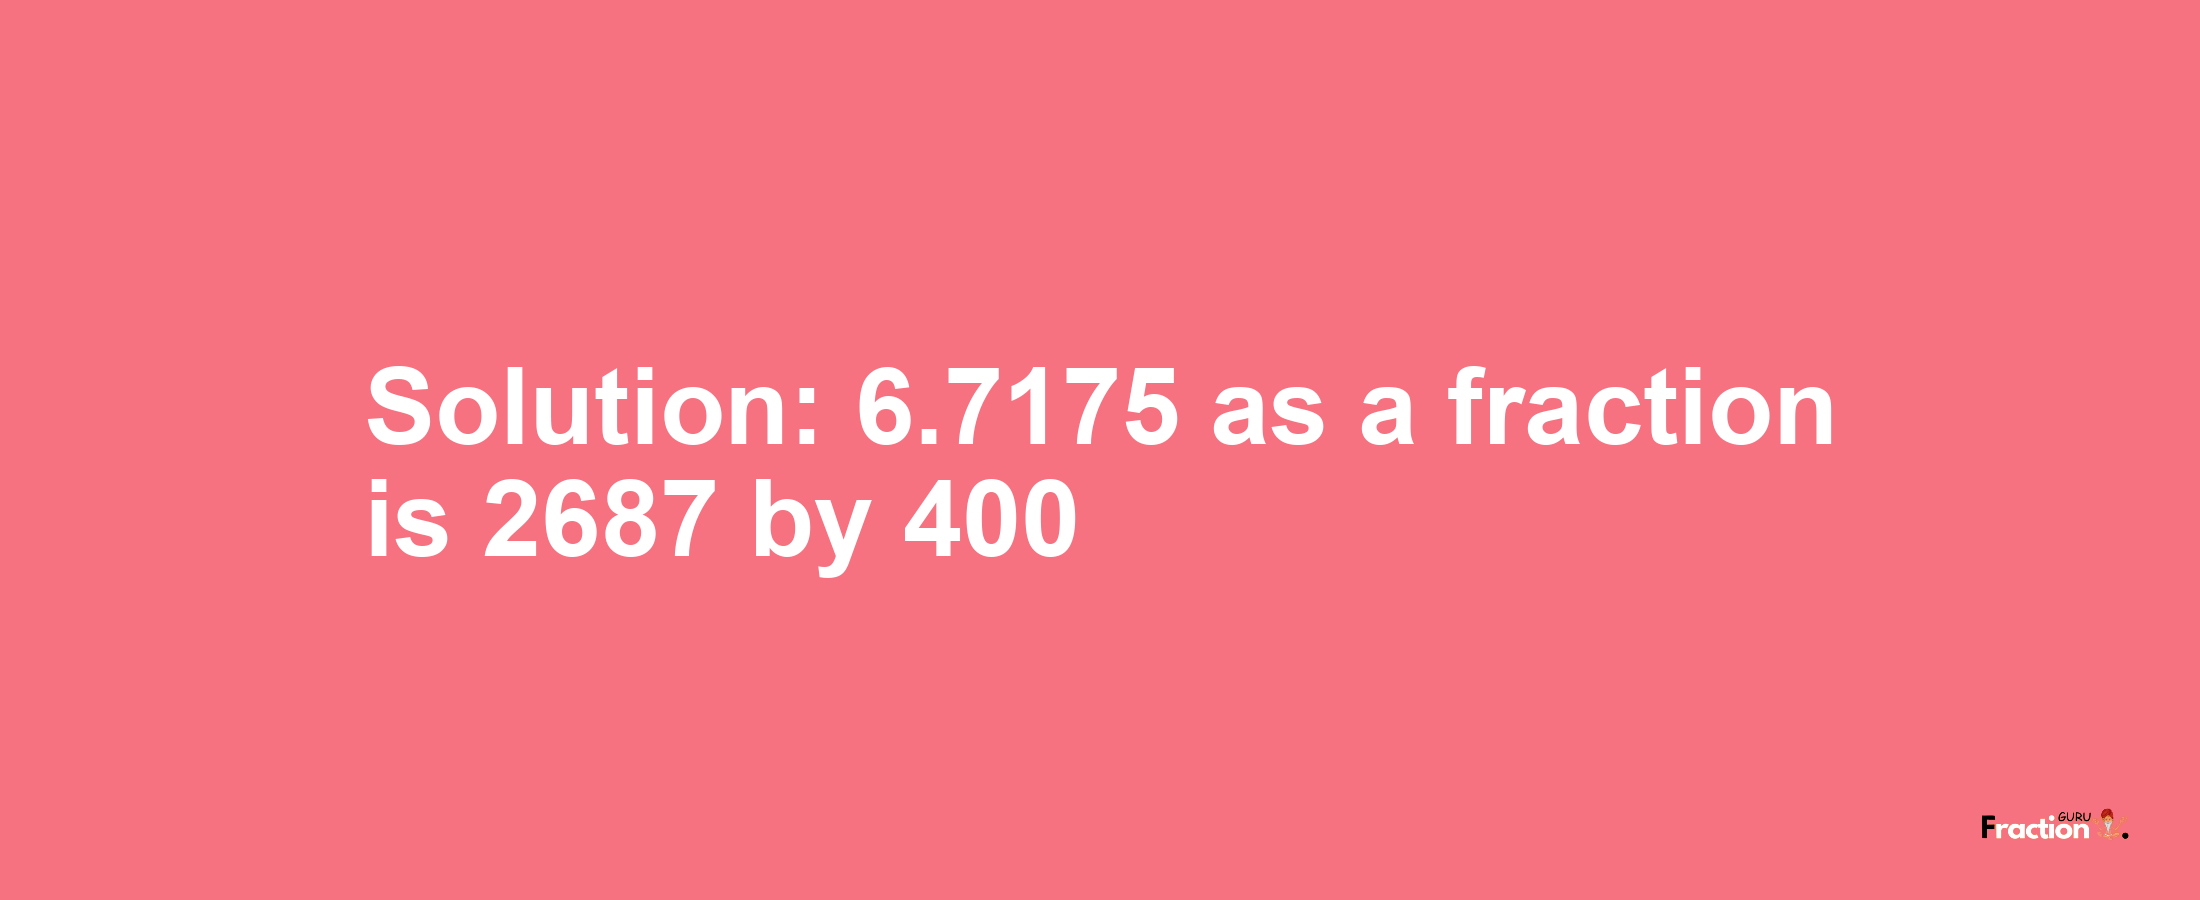 Solution:6.7175 as a fraction is 2687/400